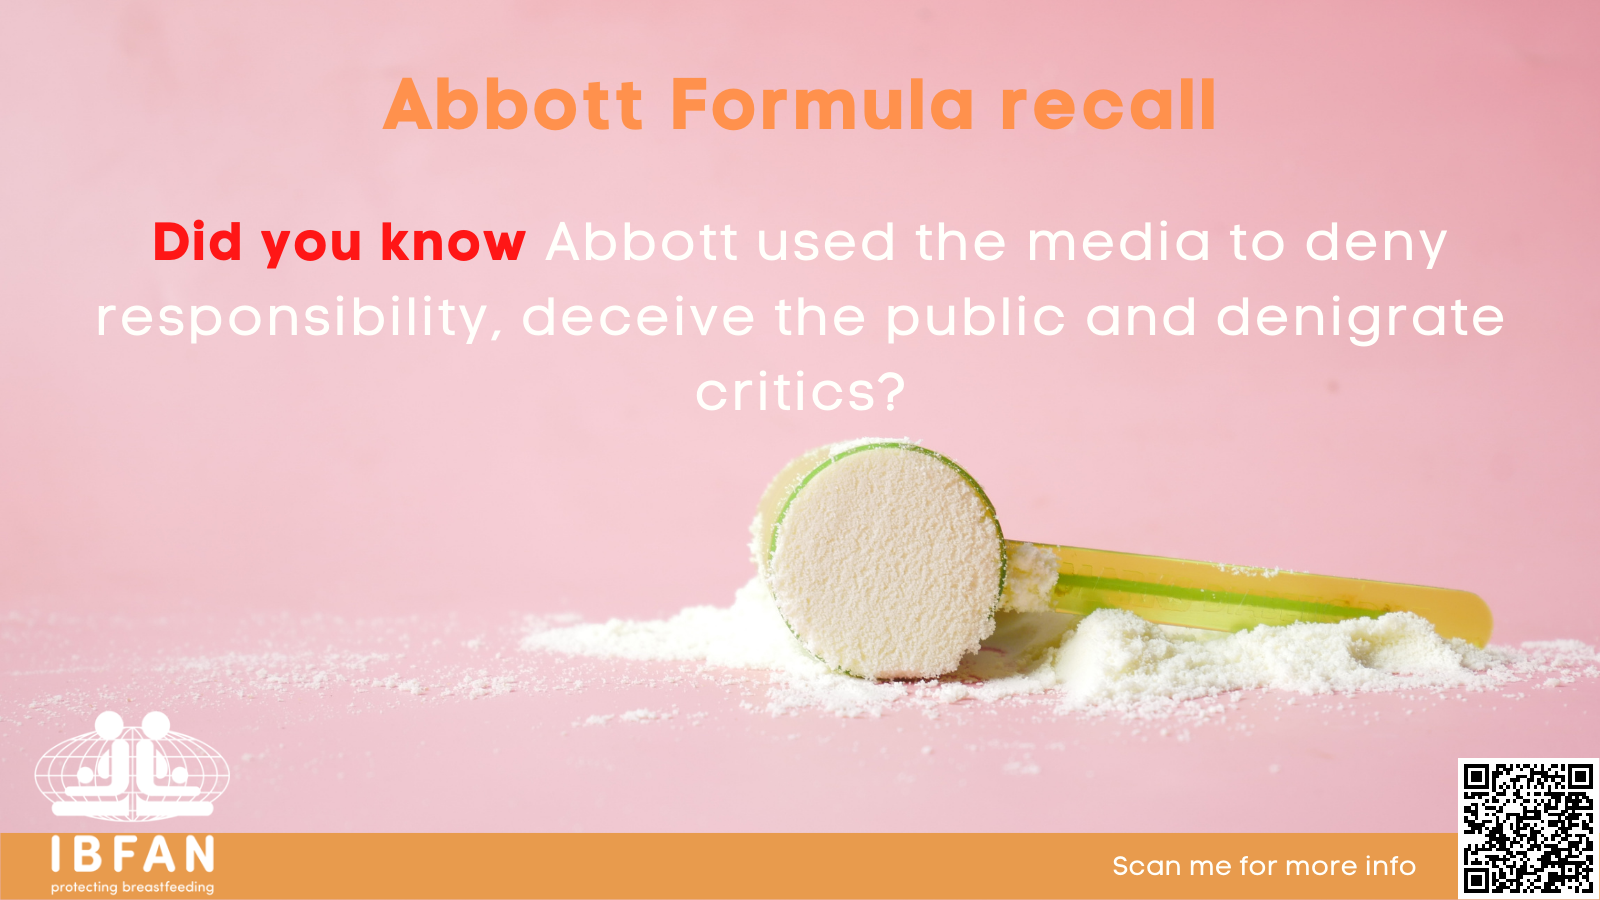 Read our Q&A about the Abbott formula contamination scandal